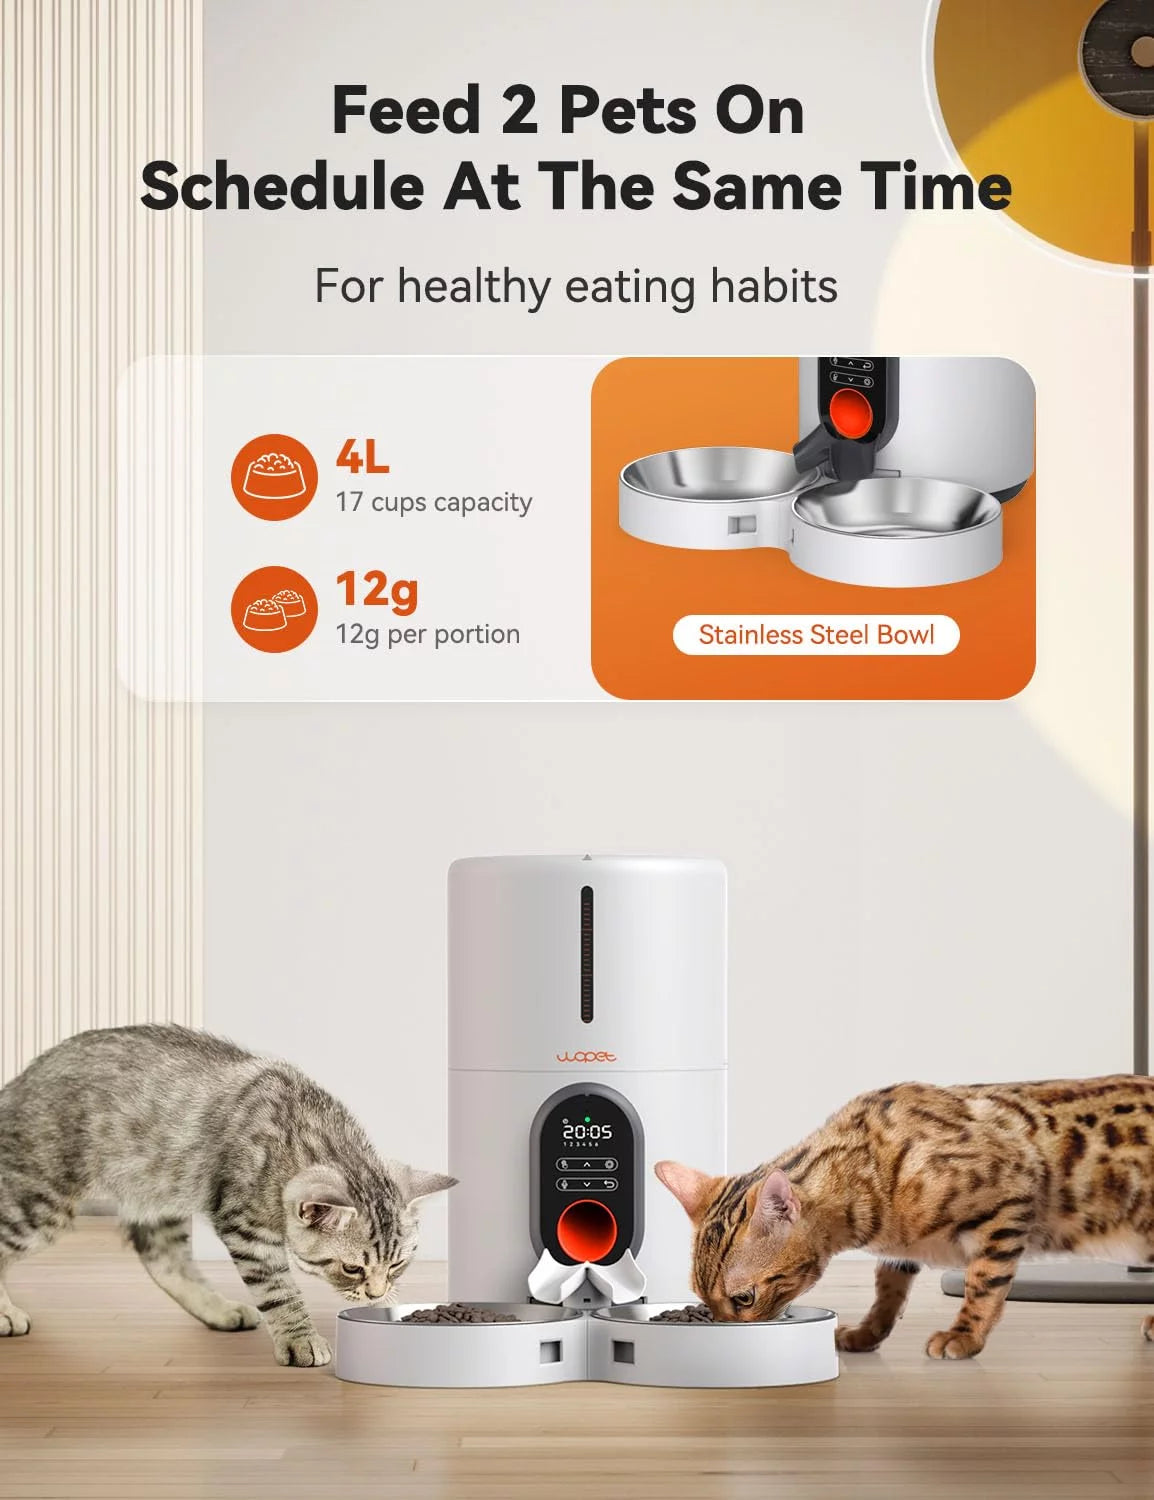 Automatic Cat Feeders for 2 Cats - Timed Dog Food Dispenser with Splitter and Two Stainless Bowls, Cat Feeders 10S Meal Call, 6 Meals per Day for Cats & Small Dogs, White